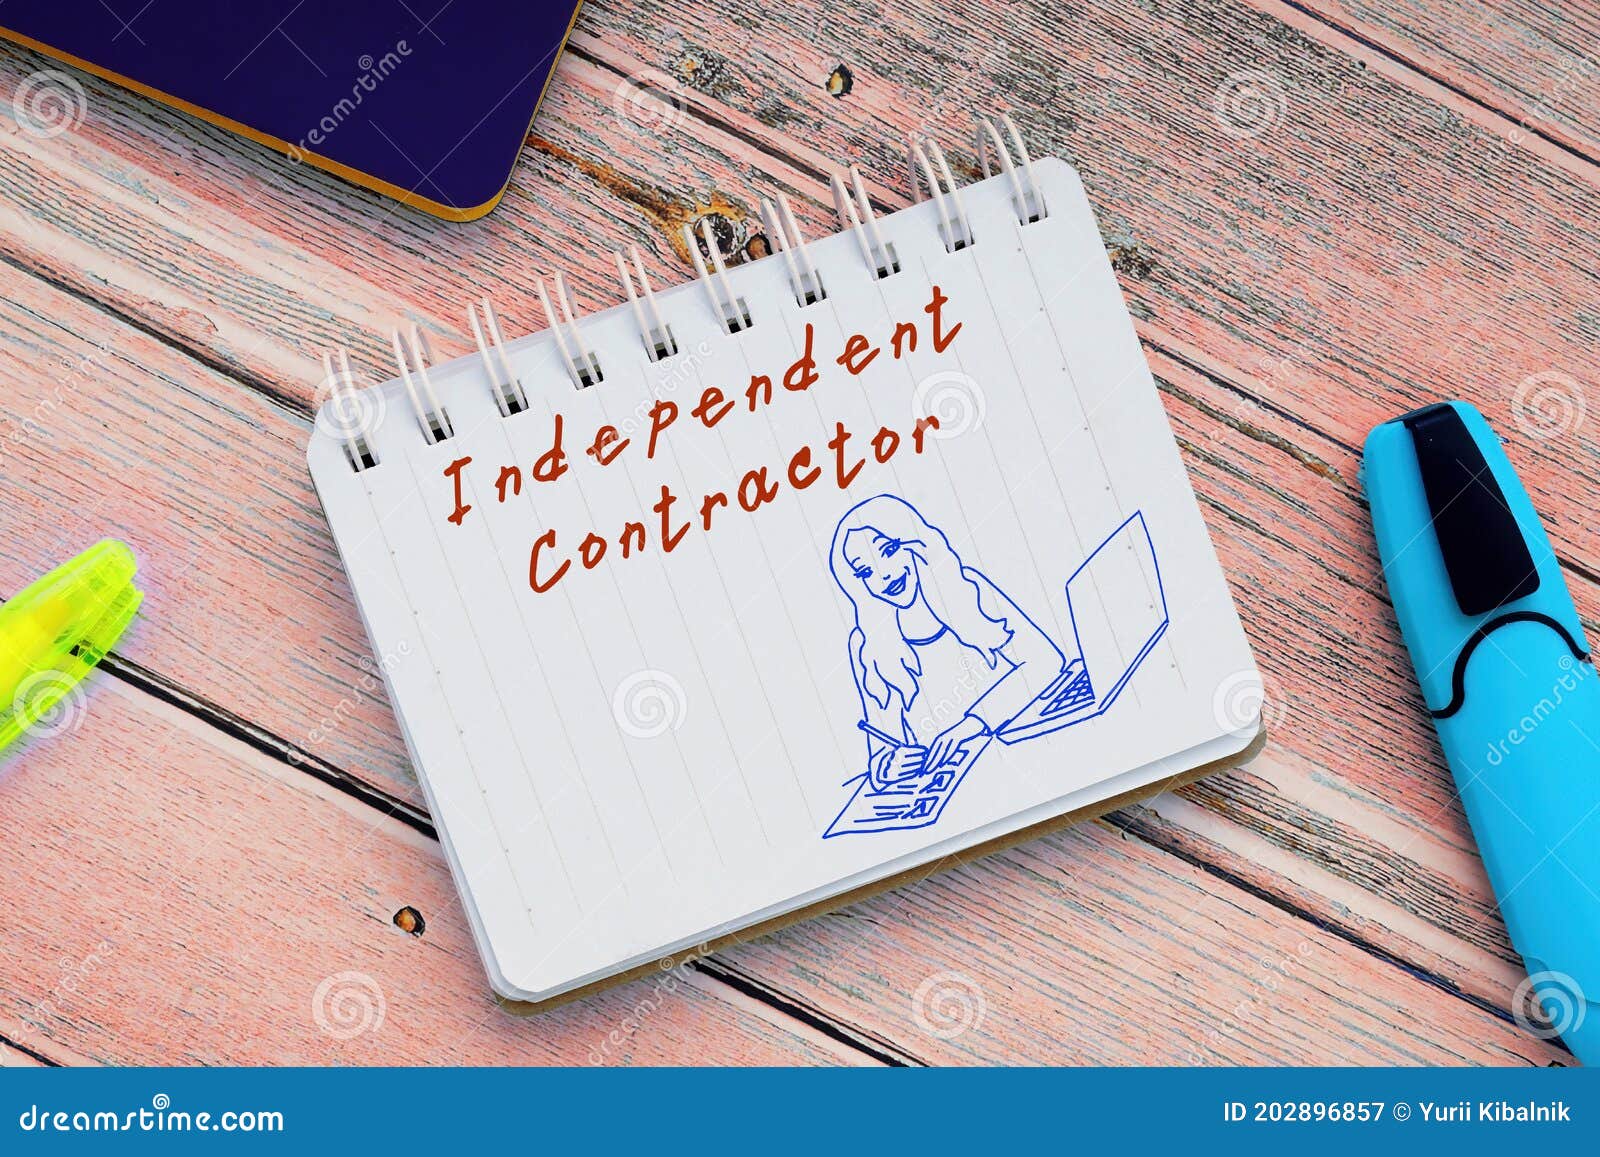 conceptual photo about independent contractor with written phrase